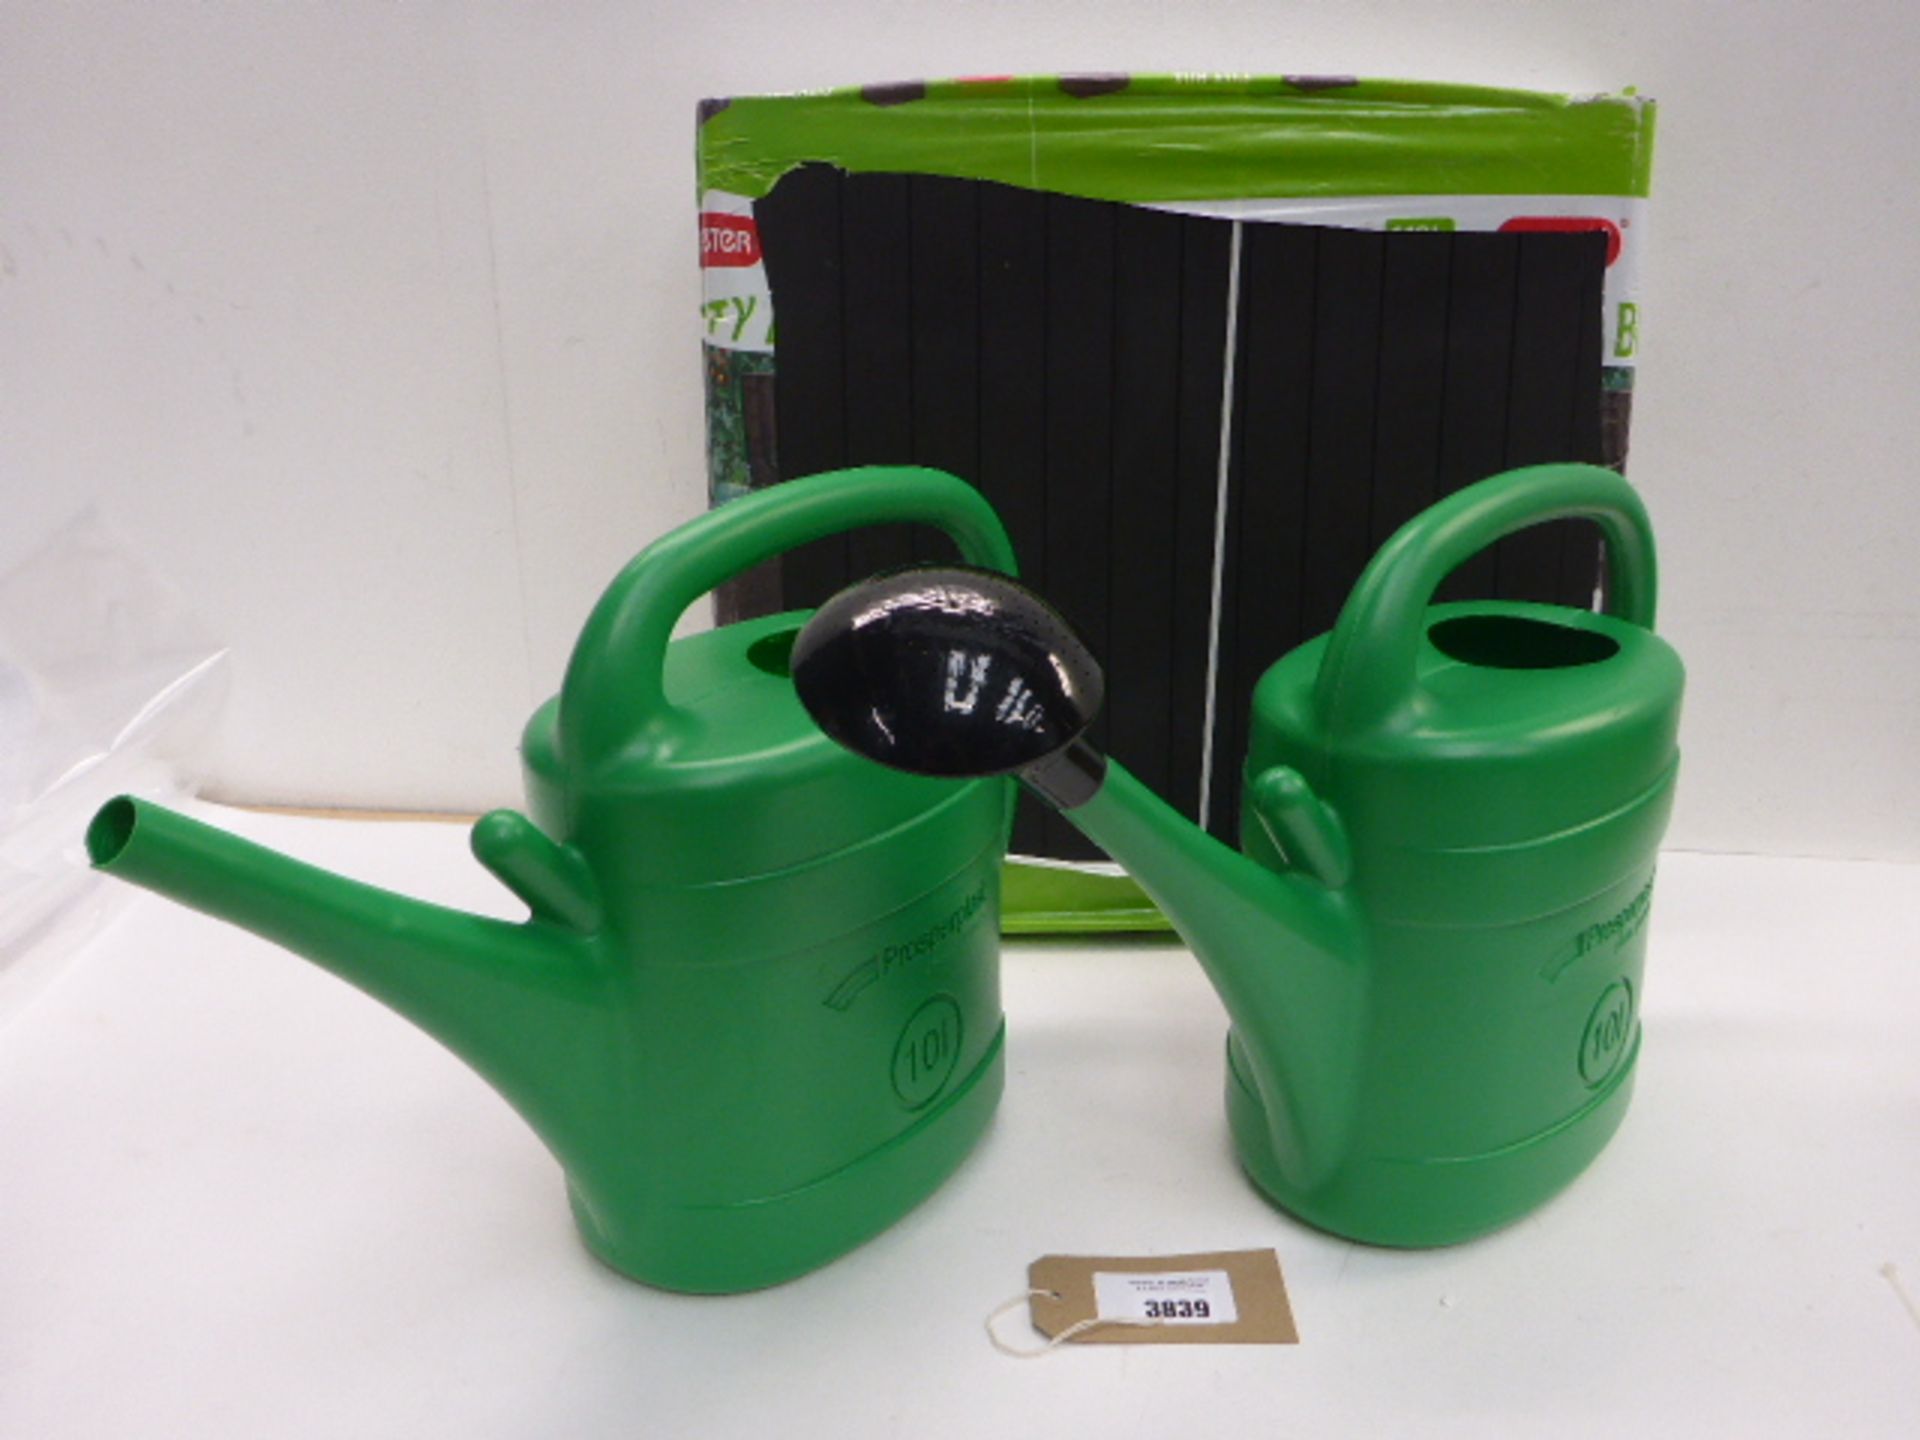 2 x 10L watering cans and City garden storage box